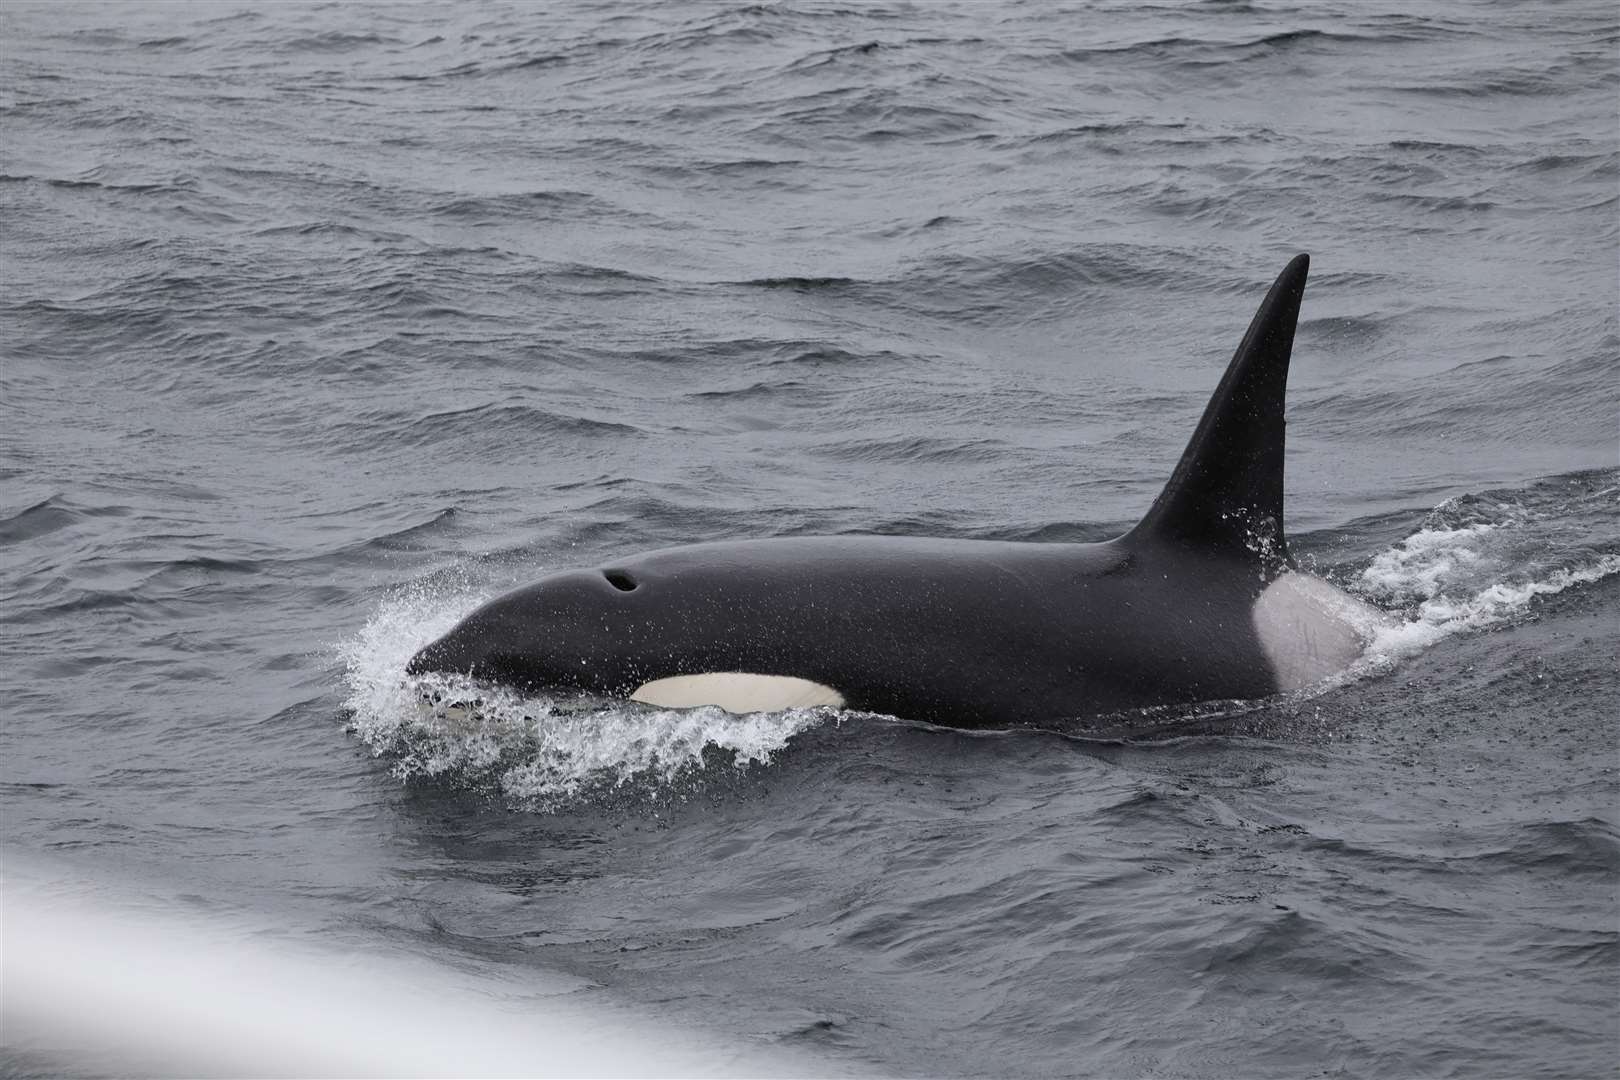 Hazel Masson said it was 'awesome' to see Ulfer so close to the ferry during Orca Watch 2022. Picture: Hazel Masson